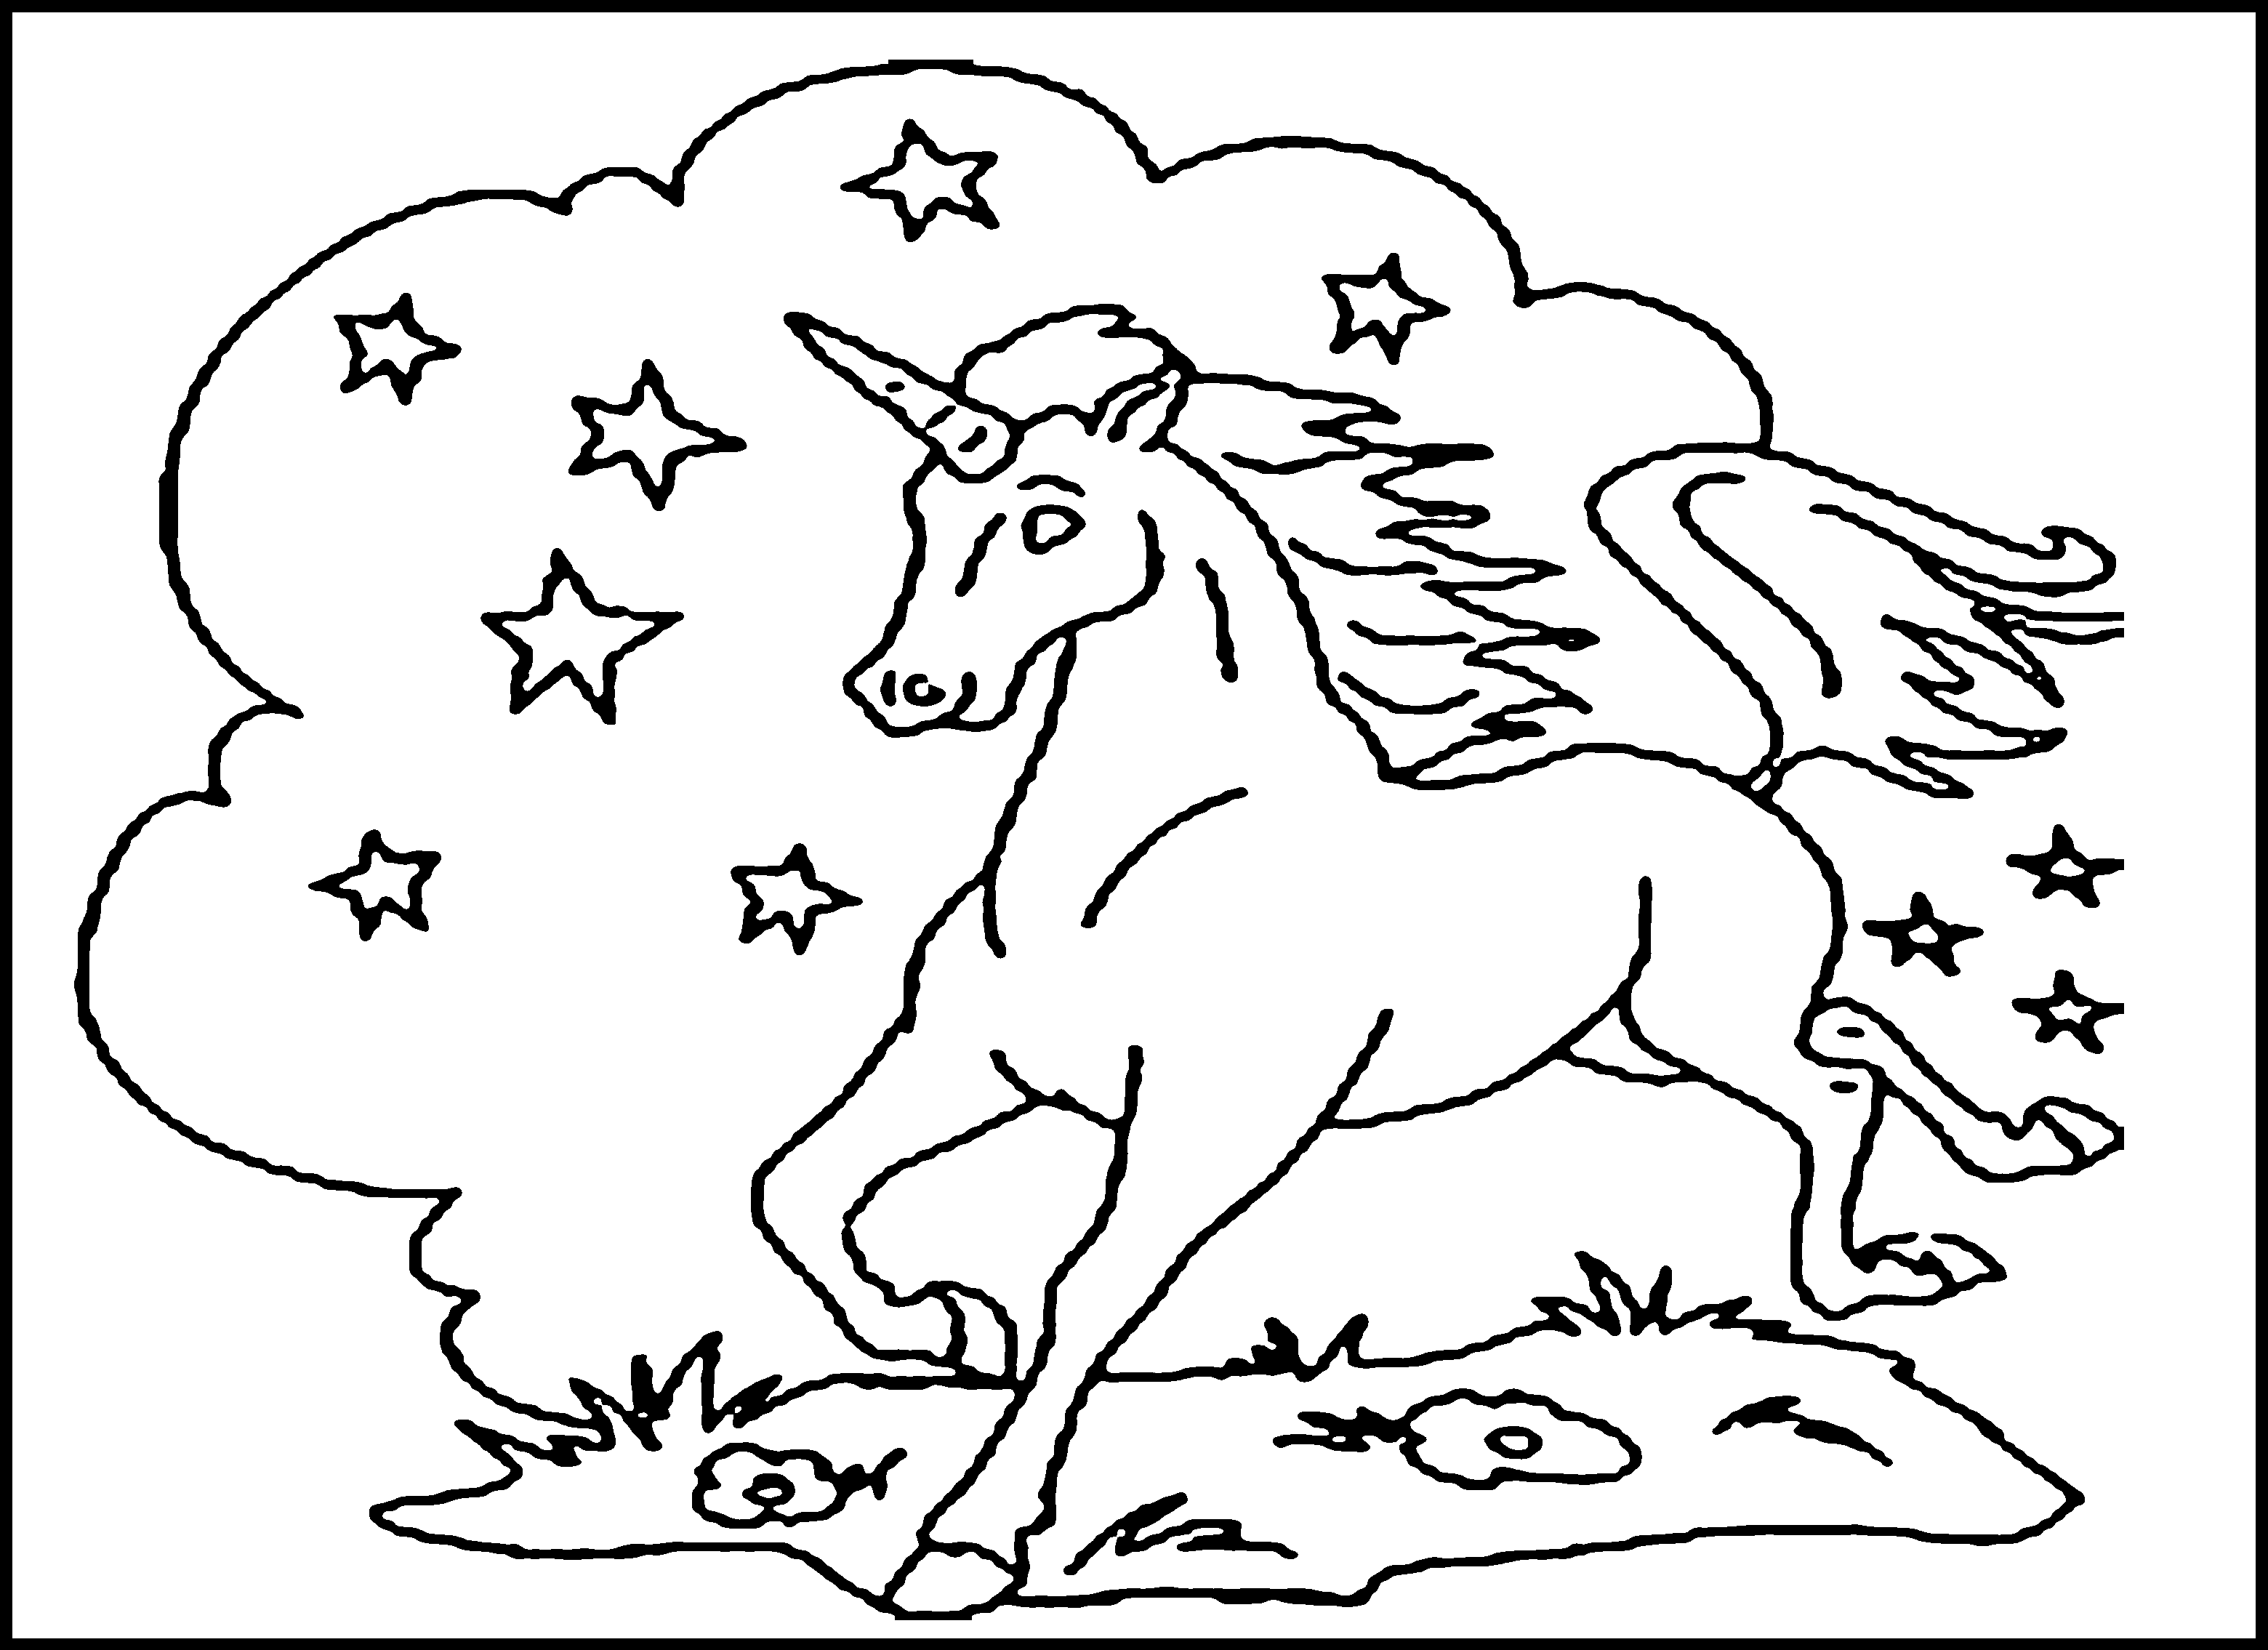 4 Best Images Of Kids Coloring Pages Printable Printable Unicorn Coloring Pages For Kids Free Coloring Pages To Print For Kids And Angry Birds Printable Coloring Pages Printablee Com